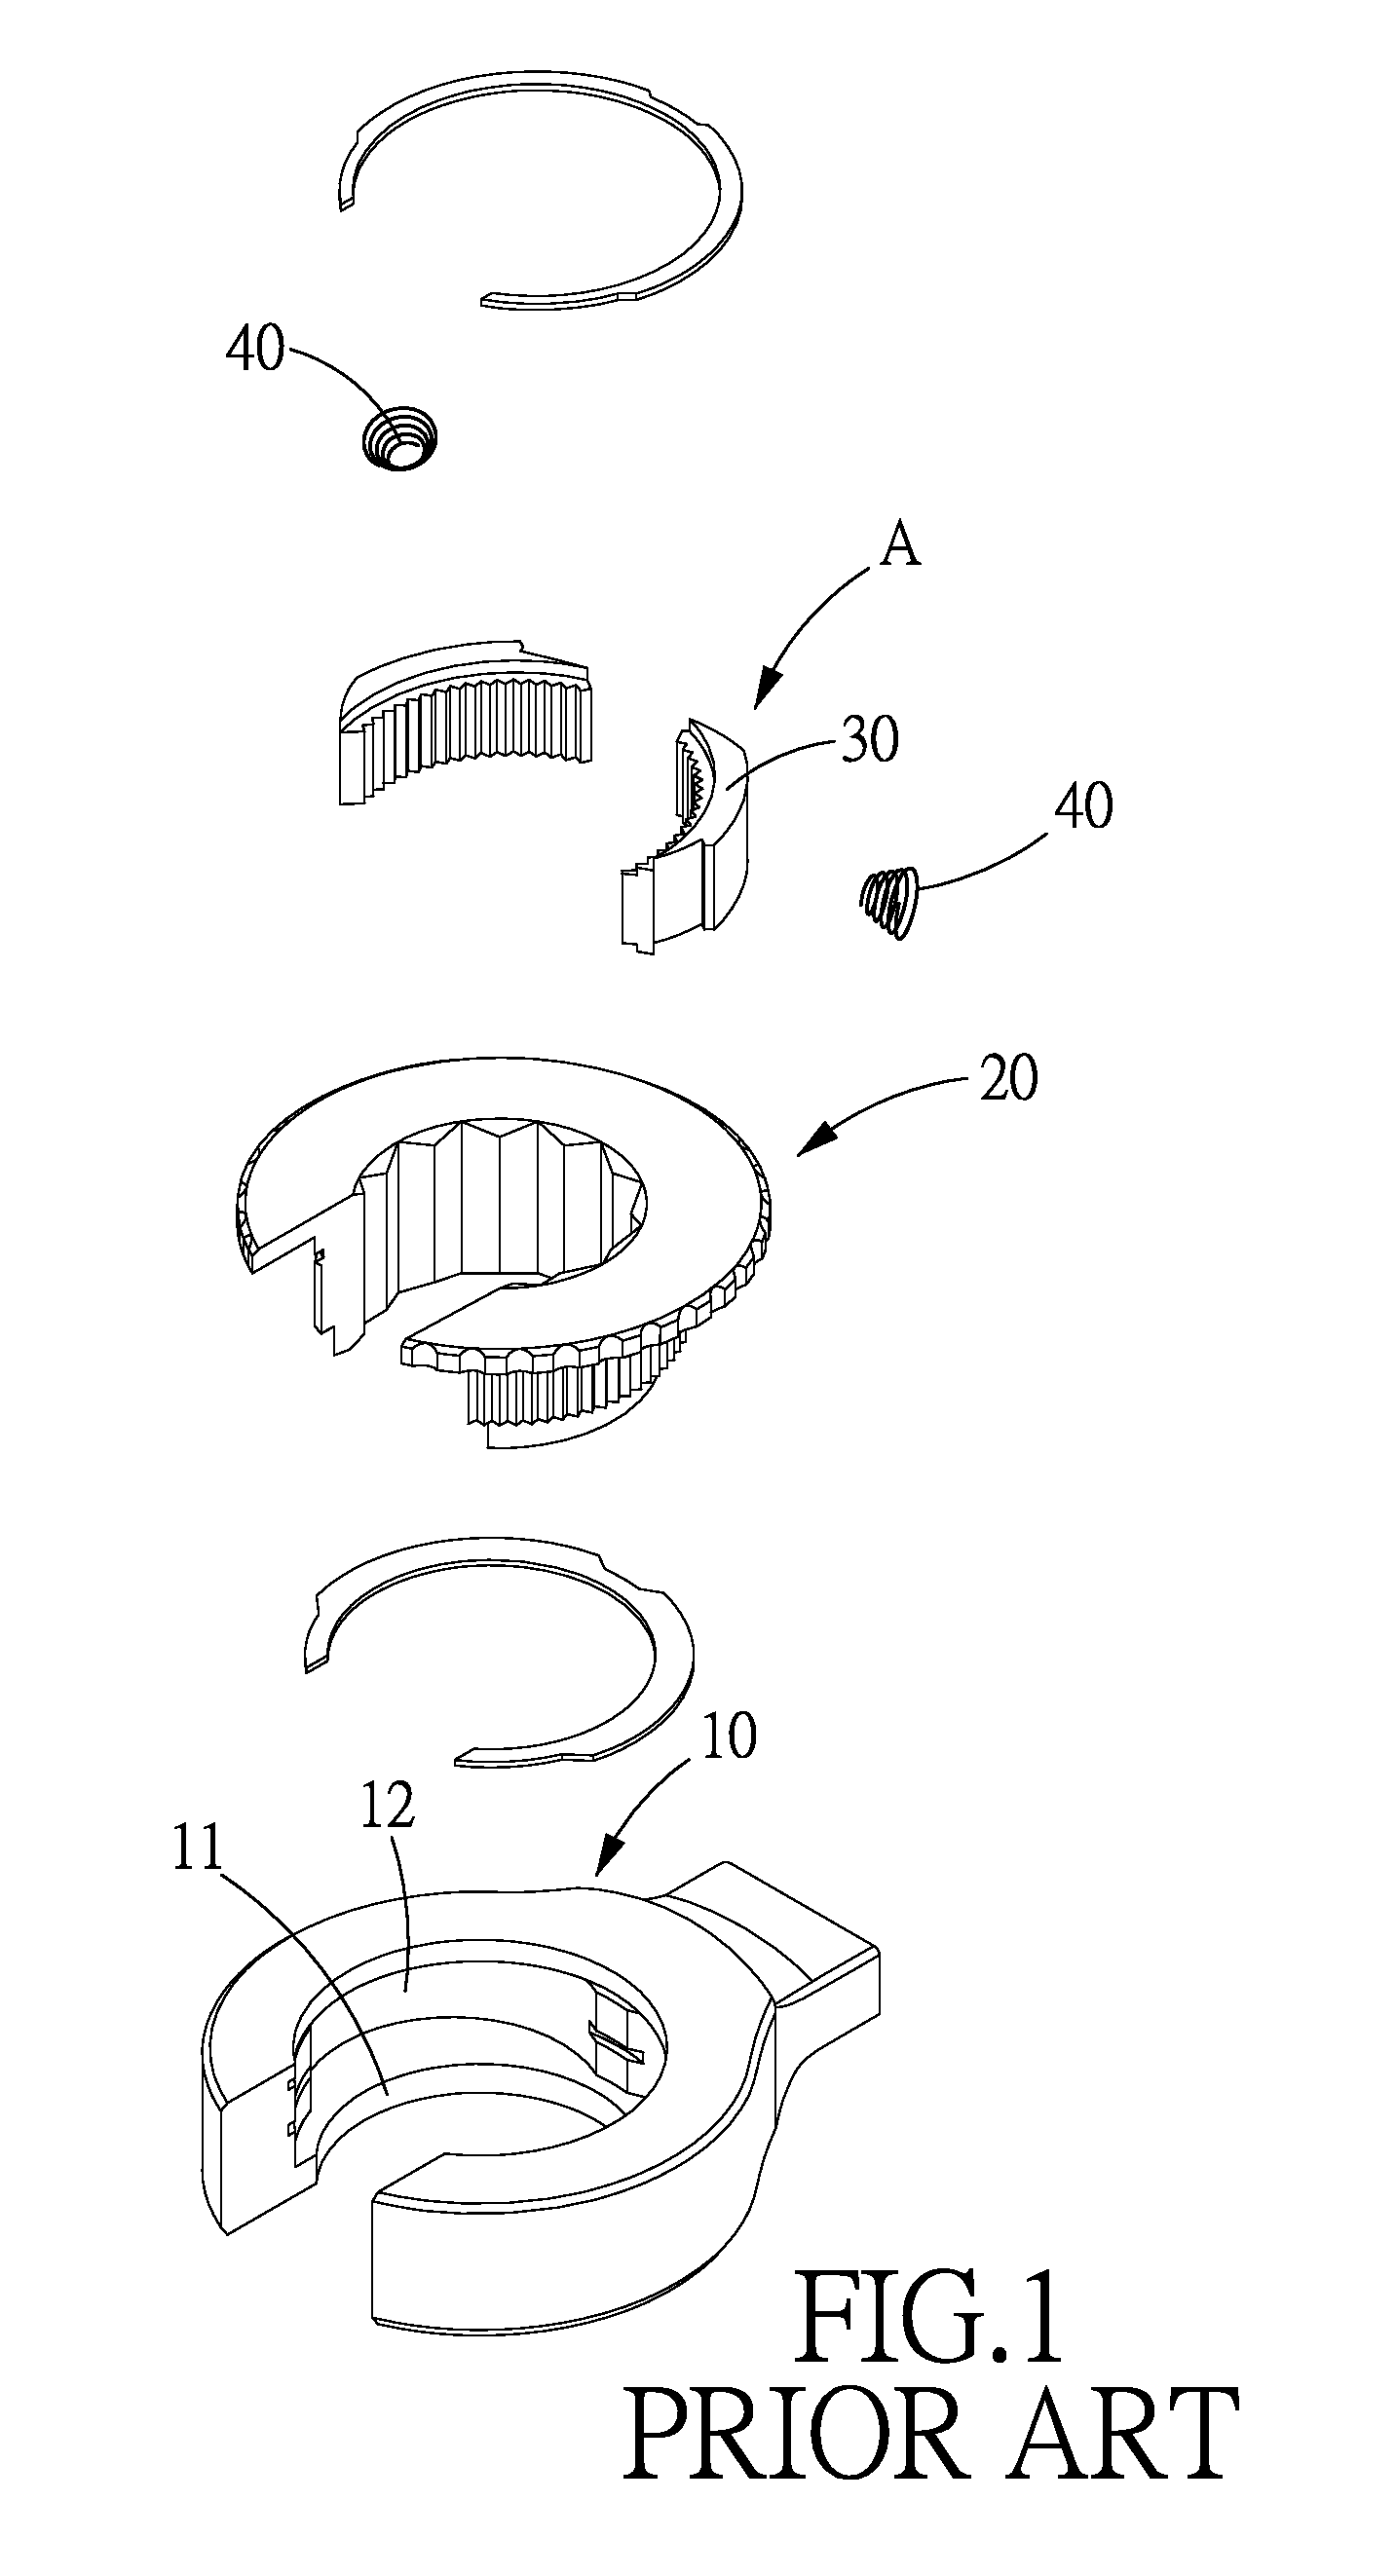 One-way wrench having a catching device with two catches and a catch holder and having differential teeth